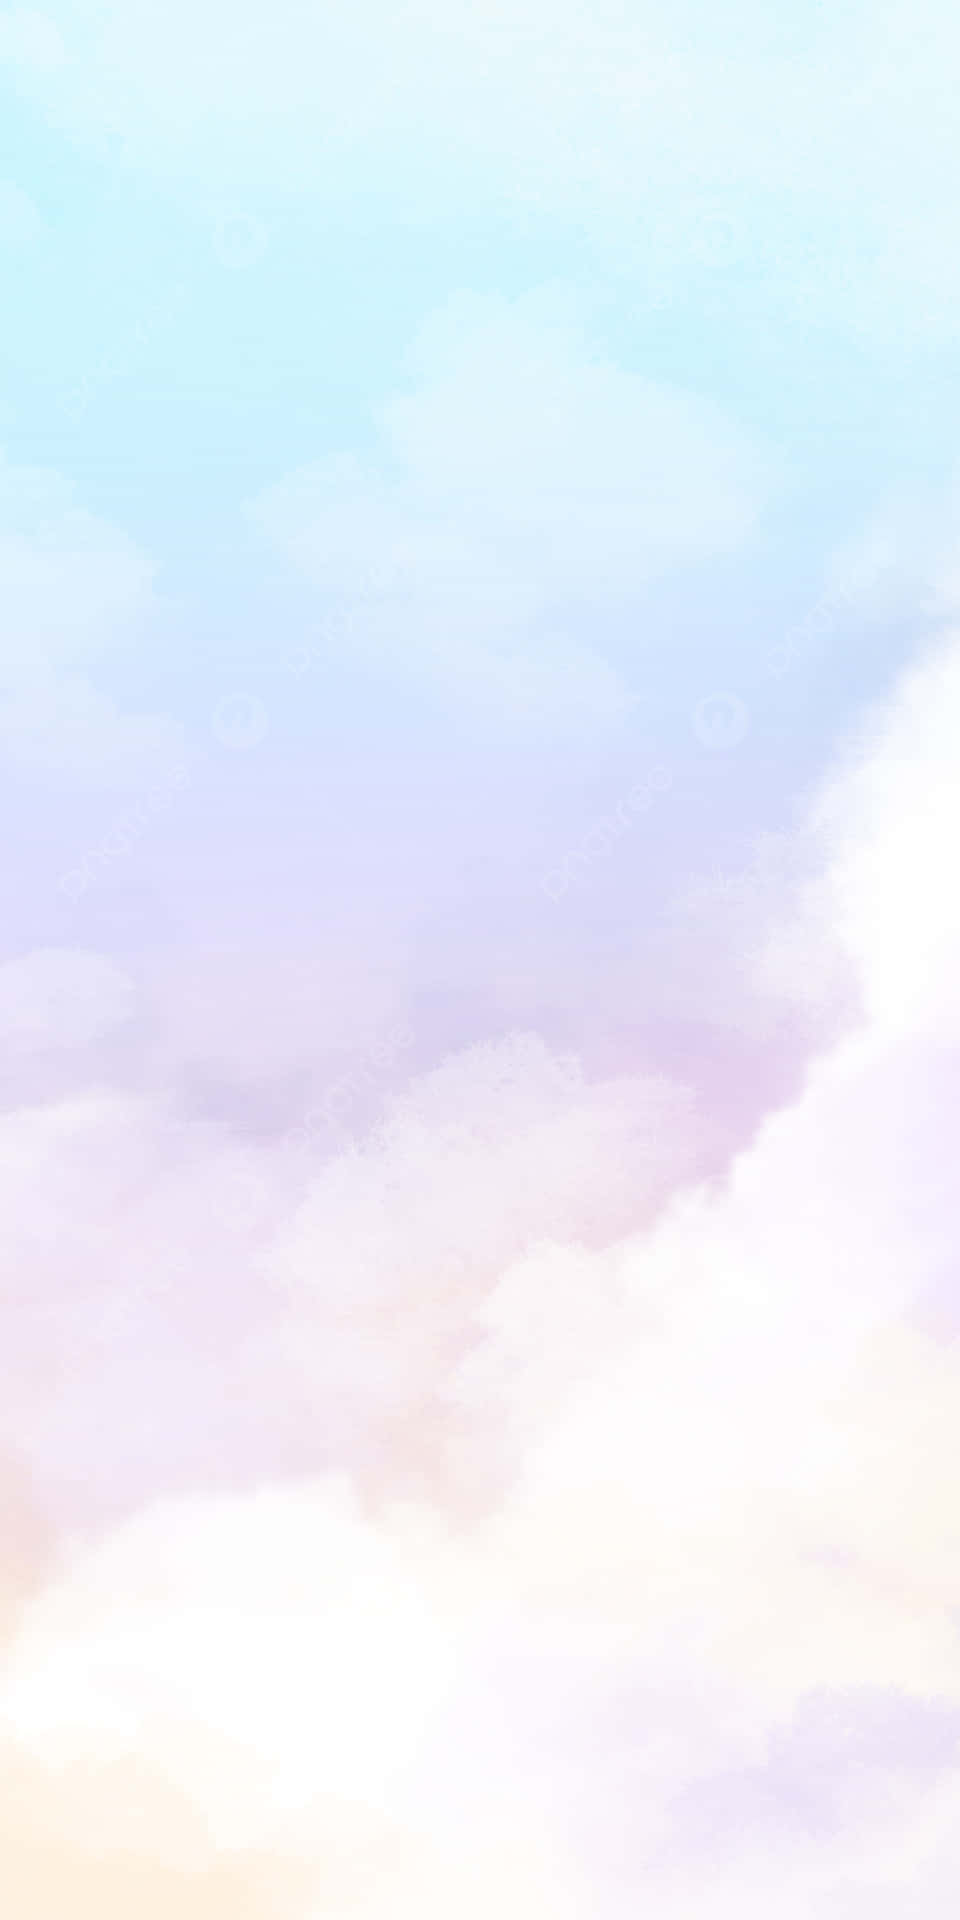 A Watercolor Background With Clouds Background